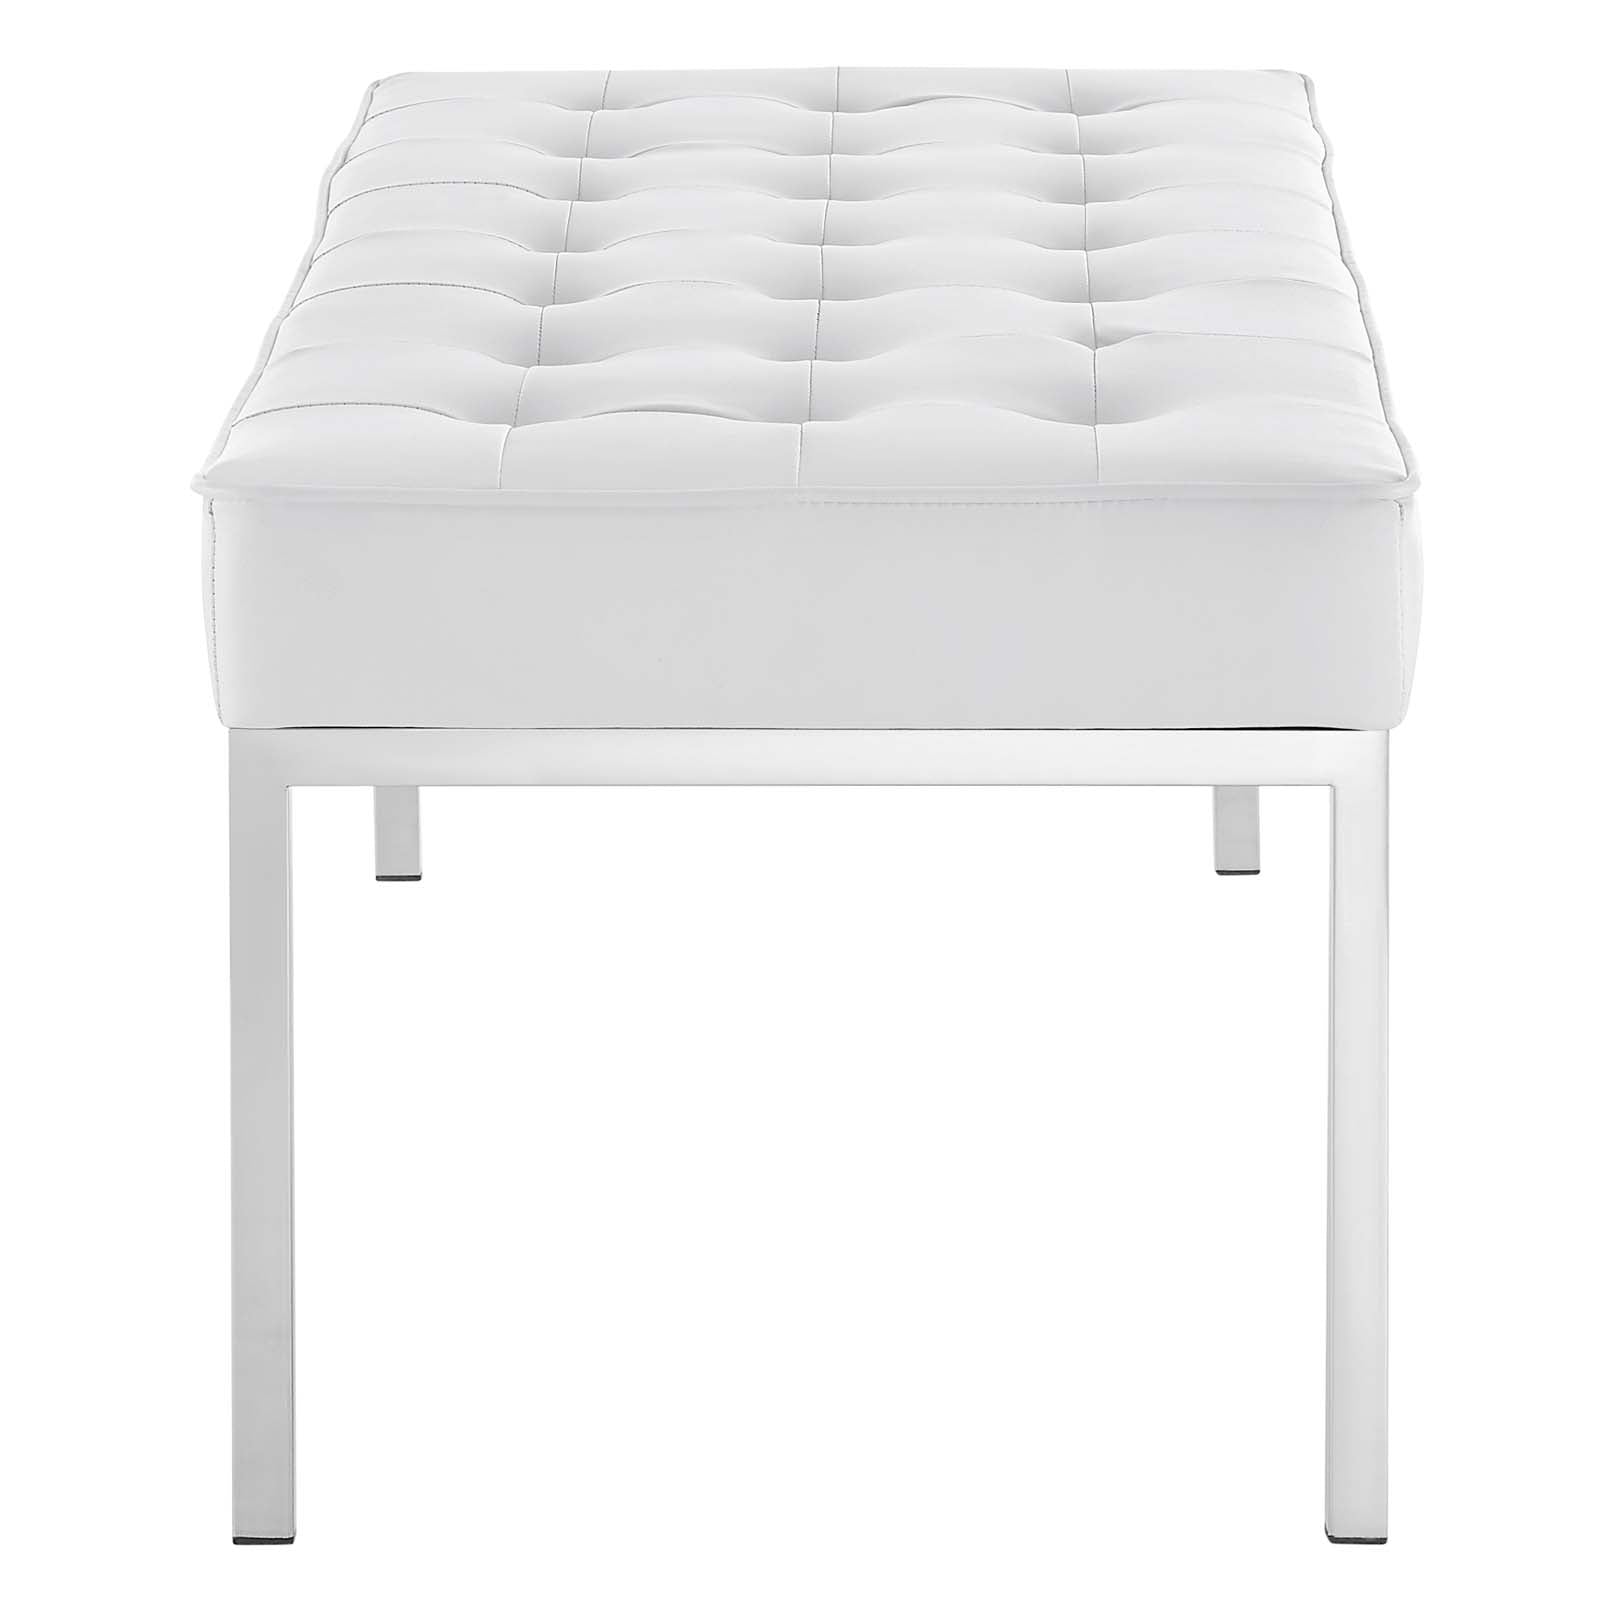 Loft Tufted Large Upholstered Faux Leather Bench